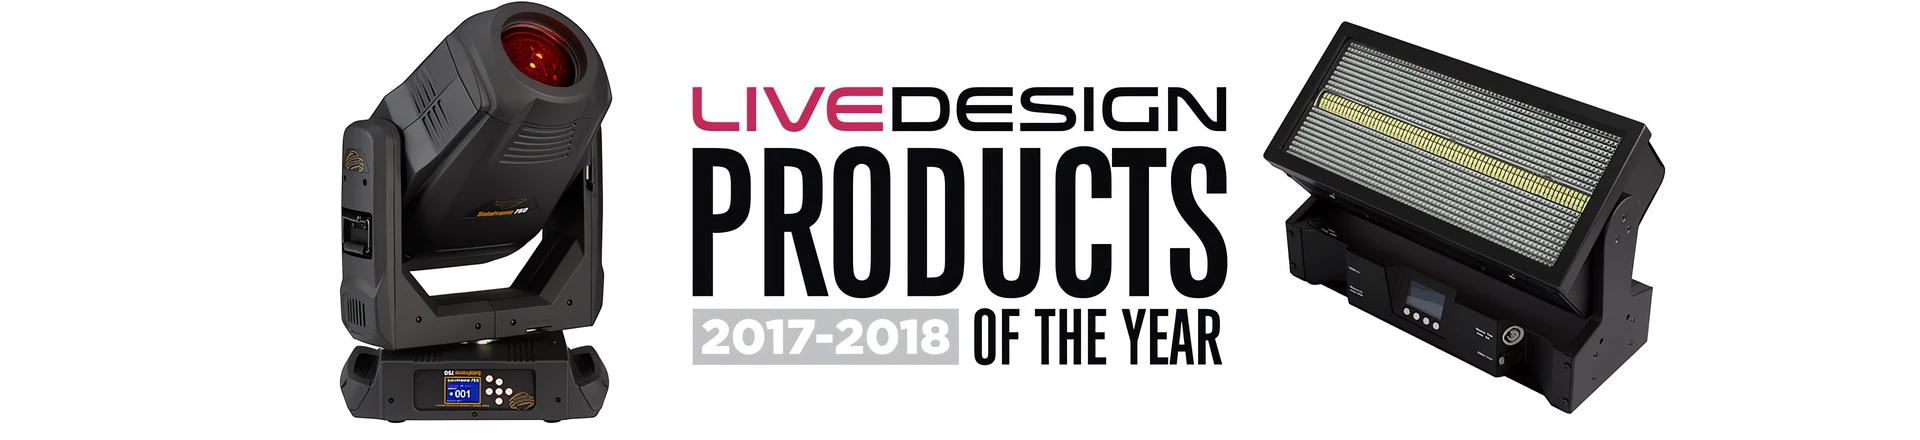 Nagrody "Product of the Year" według Live Design 2017-2018